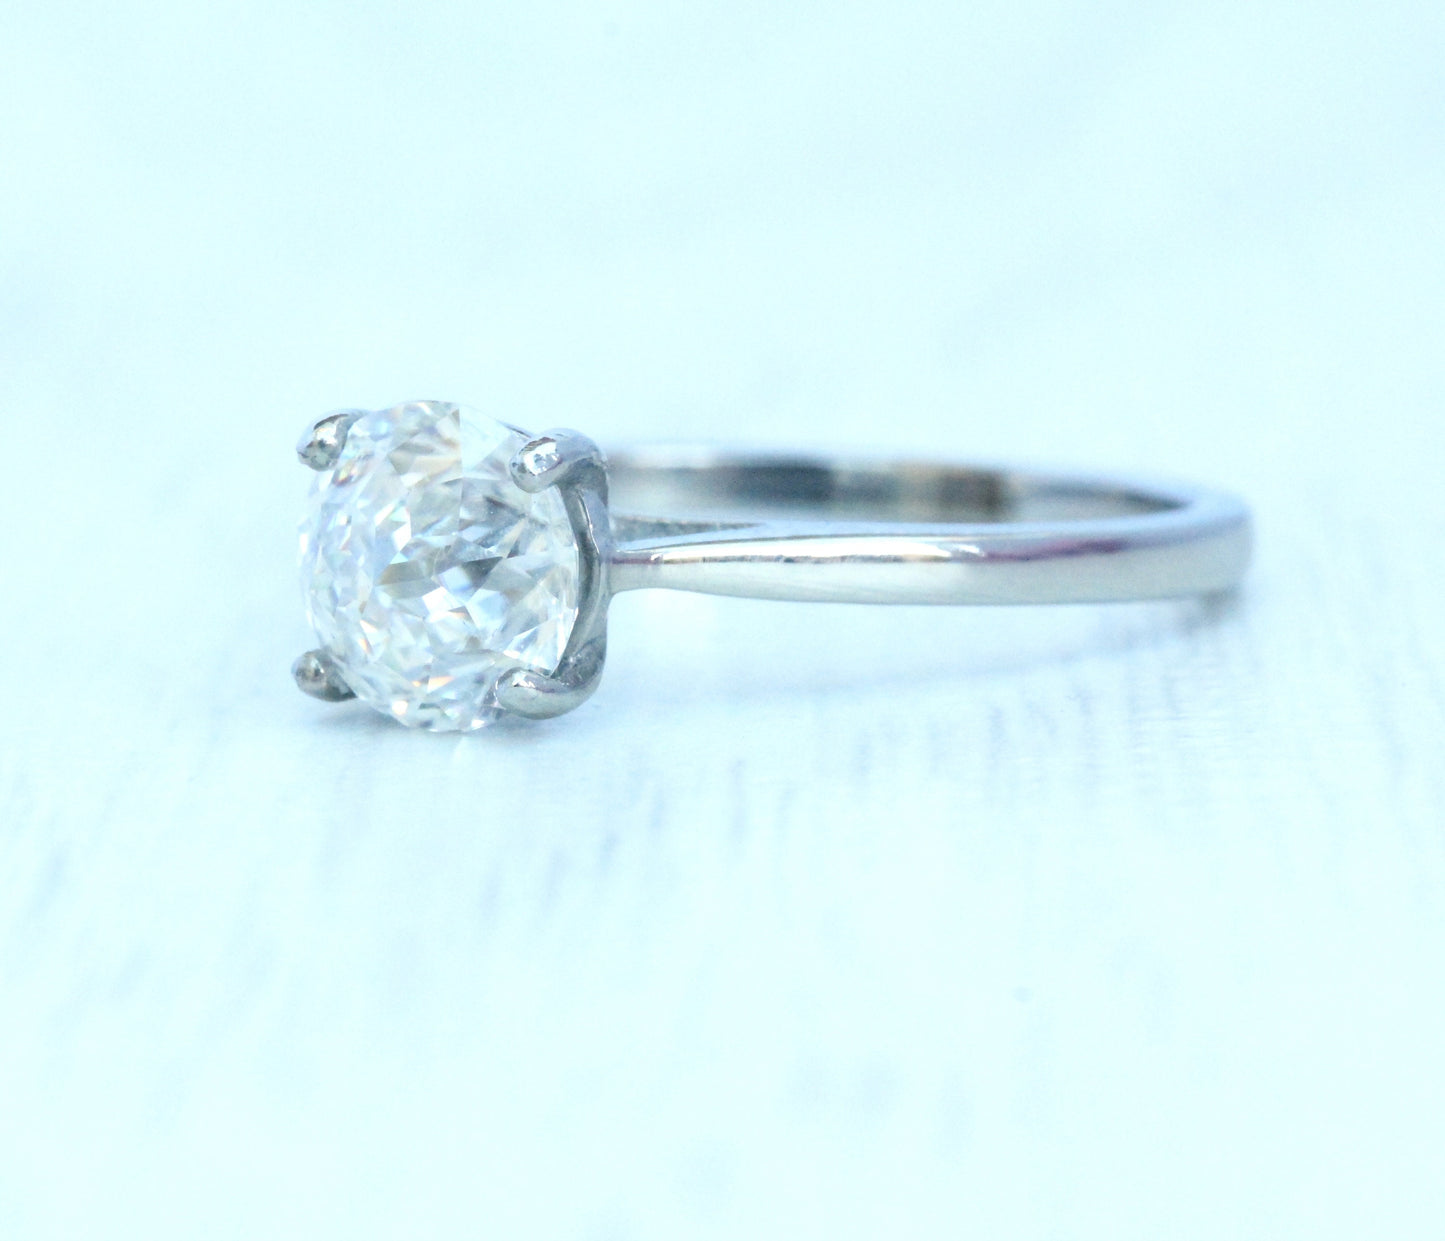 Jubilee Cut Genuine White Moissanite engagement ring, 1ct, 1.5ct and 2ct options